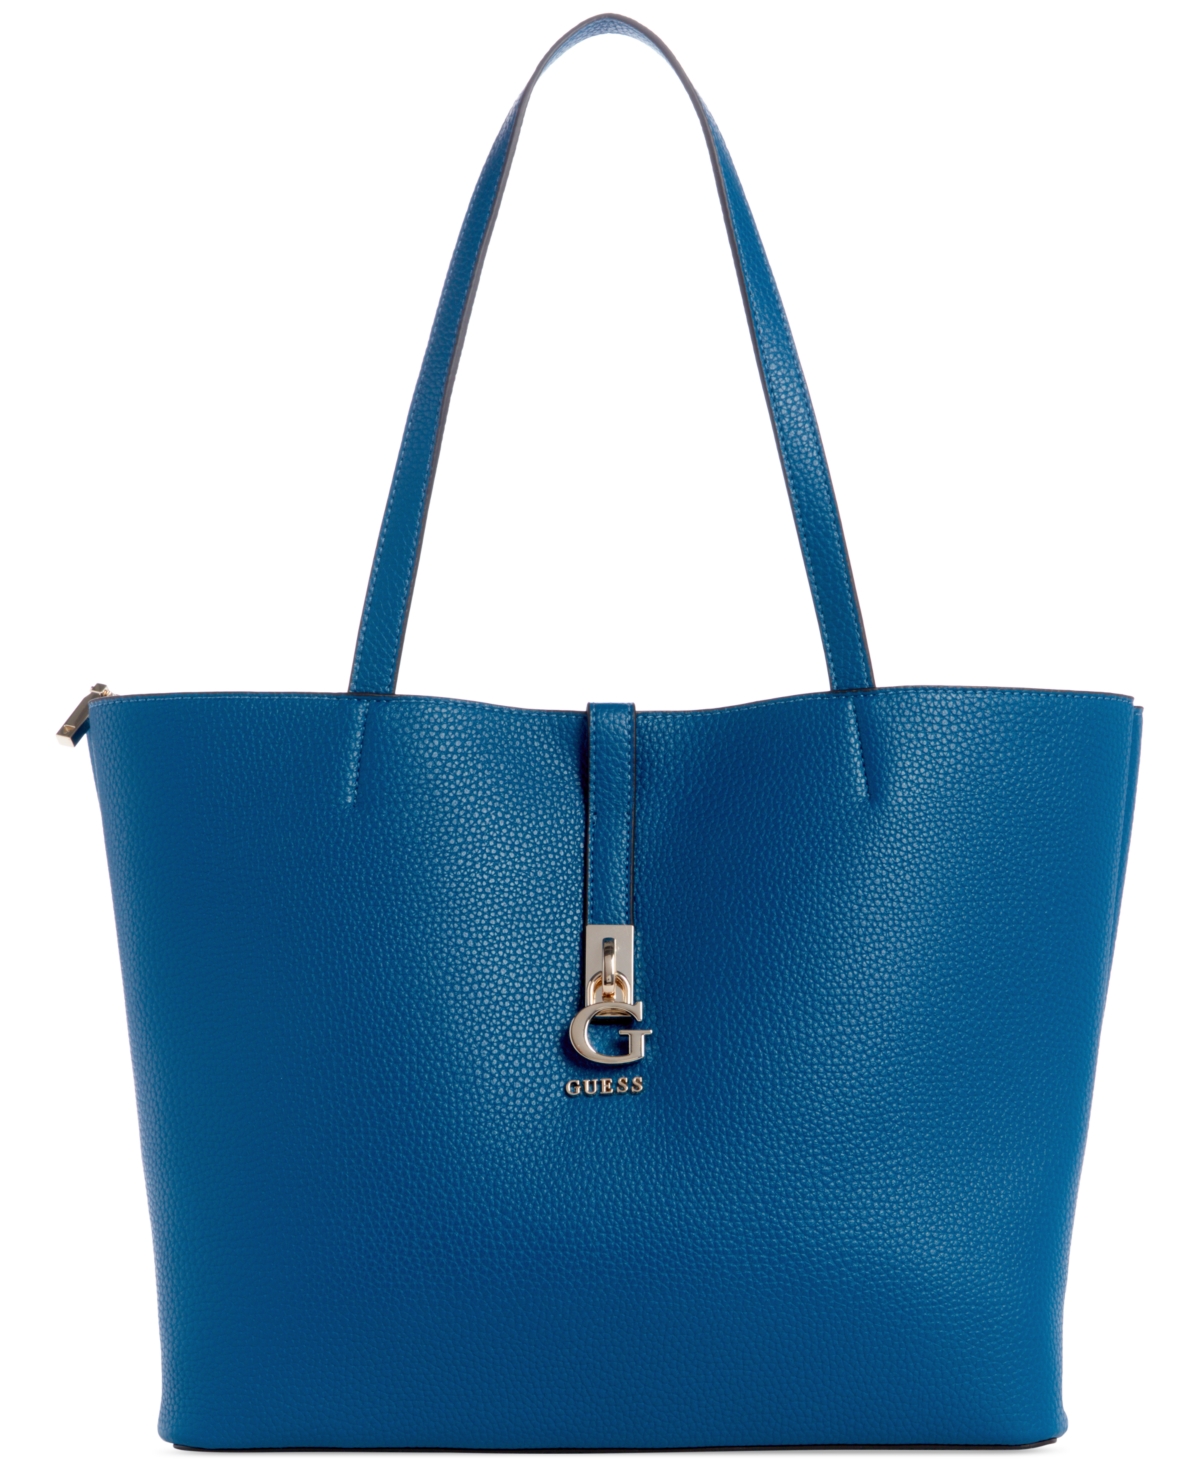 Guess Gianessa Elite Tote In Petrol